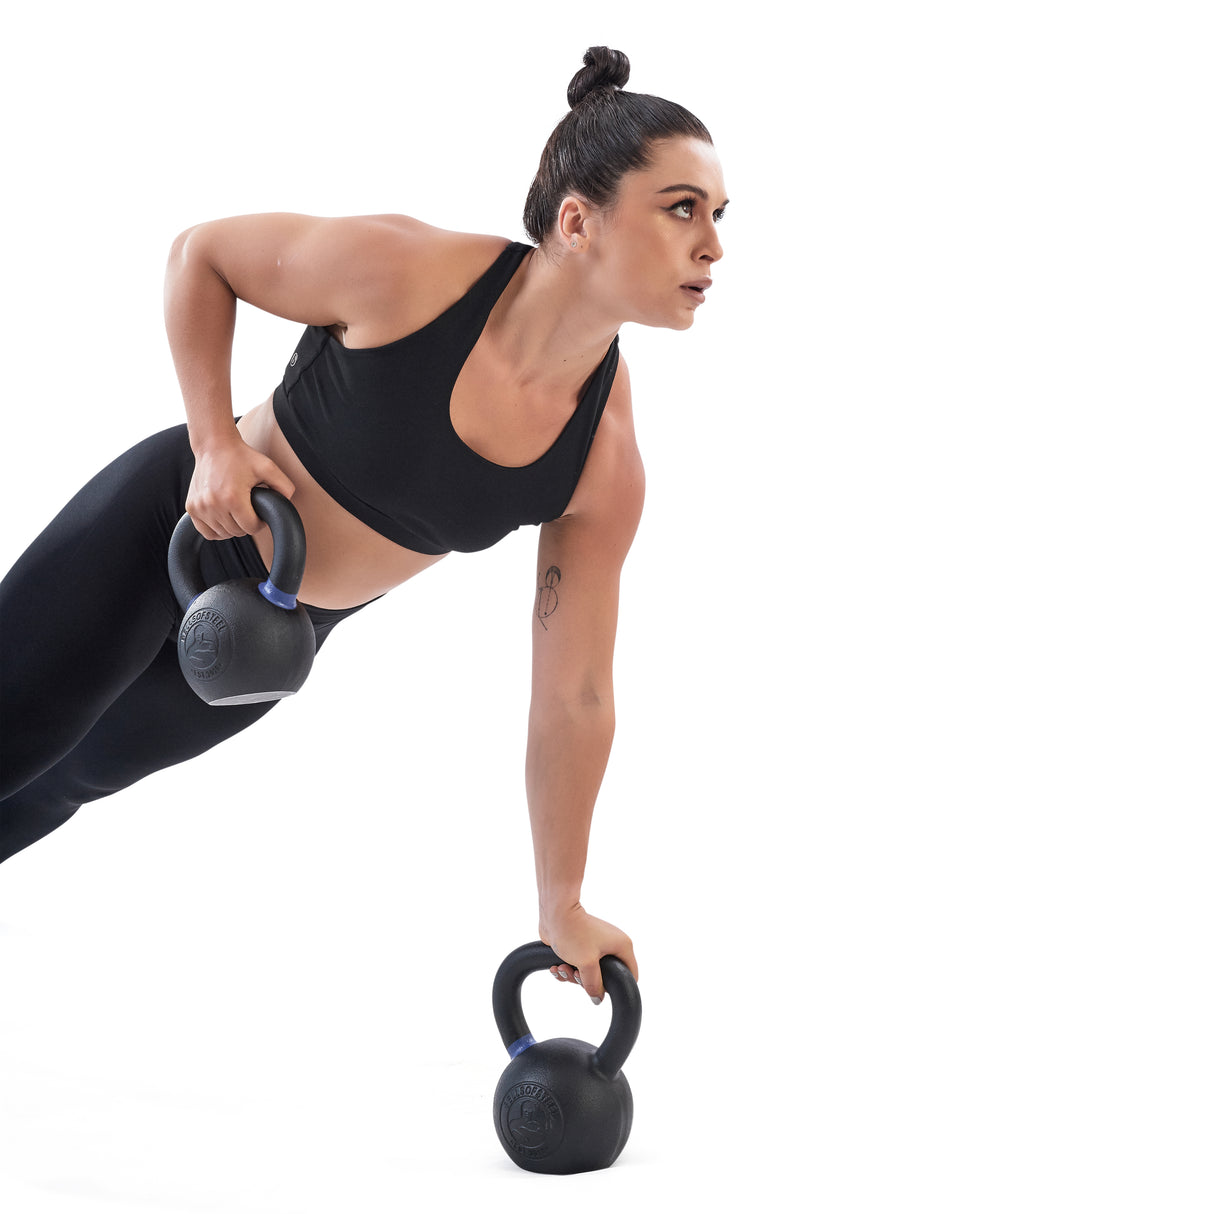 Female athlete doing plank pull-through with Powder Coated Kettlebells